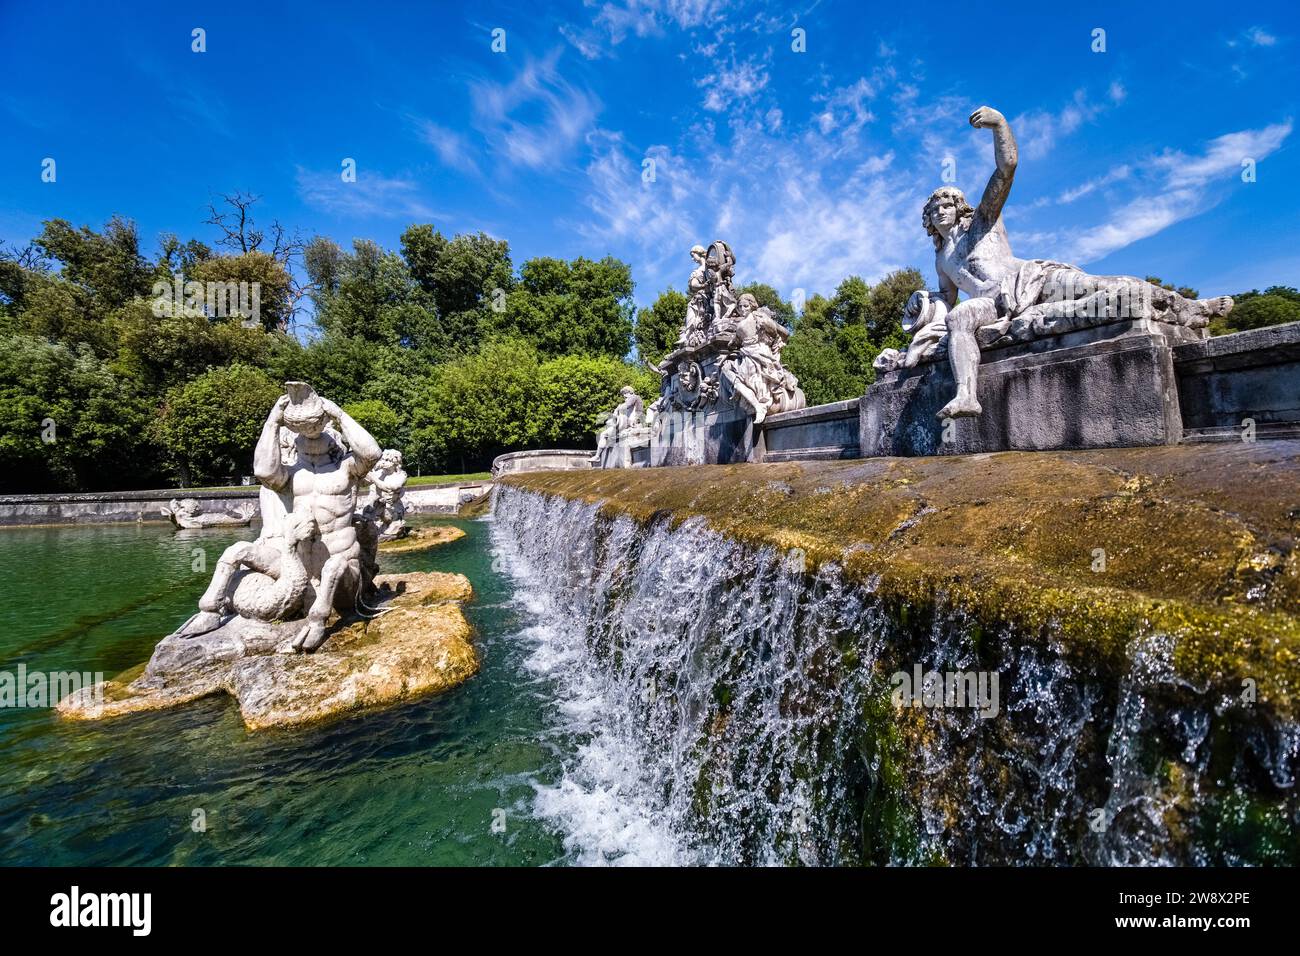 The Fountain of Ceres, Fontana di Cerere, in the park of the Giardini Reali, which belongs to the Royal Palace of Caserta, Reggia di Caserta. Stock Photo